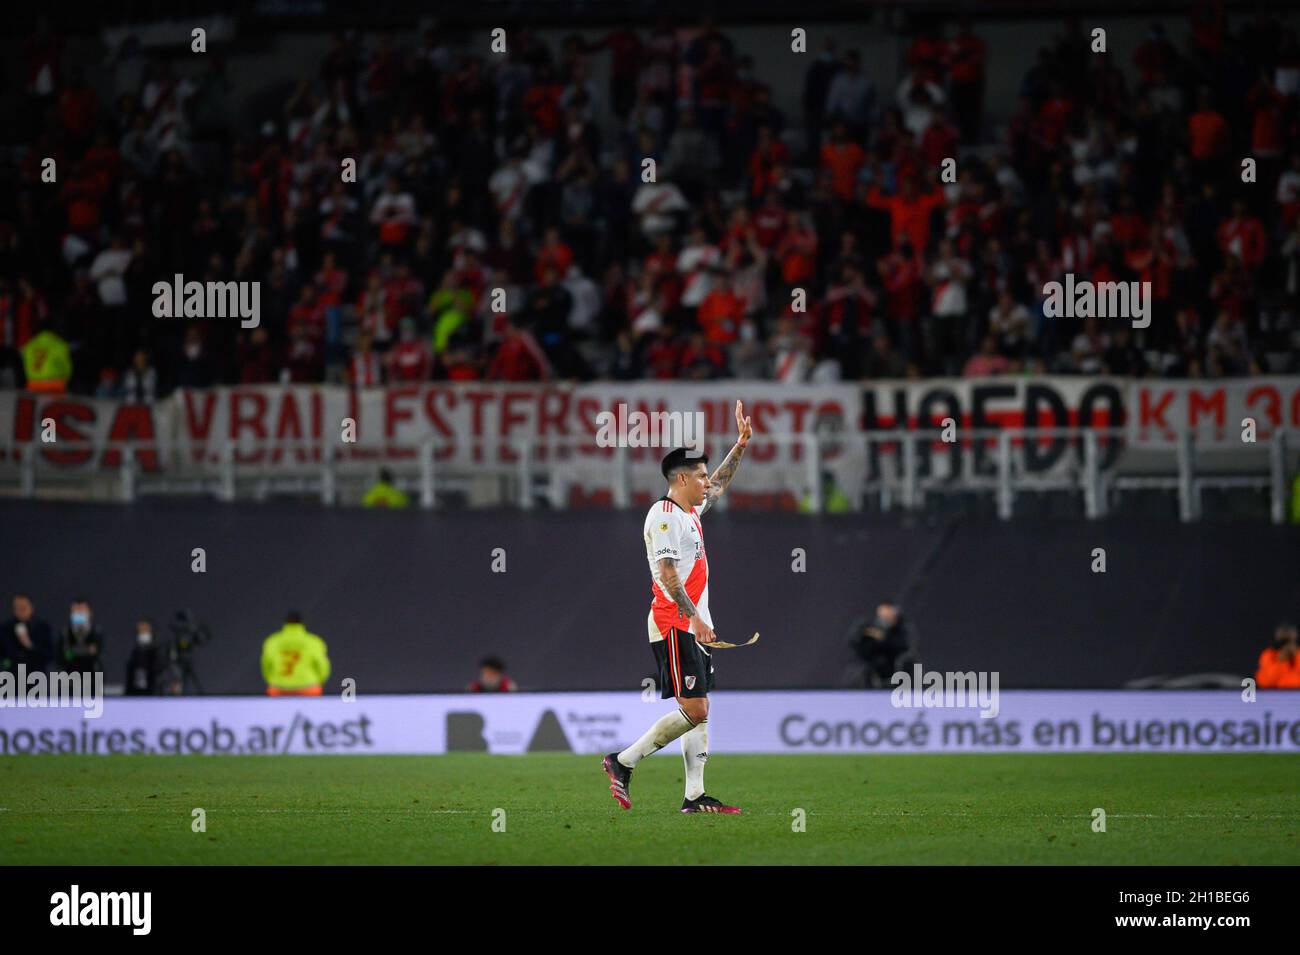 Buenos Aires, Argentina. 17th Oct, 2021. Enzo Perez reacts during the match between River Plate and San Lorenzo as part of Torneo Liga Professional 2021 at Estadio Monumental Antonio Vespucio Liberti. (Final scores; River Plate 3:1San Lorenzo) Credit: SOPA Images Limited/Alamy Live News Stock Photo